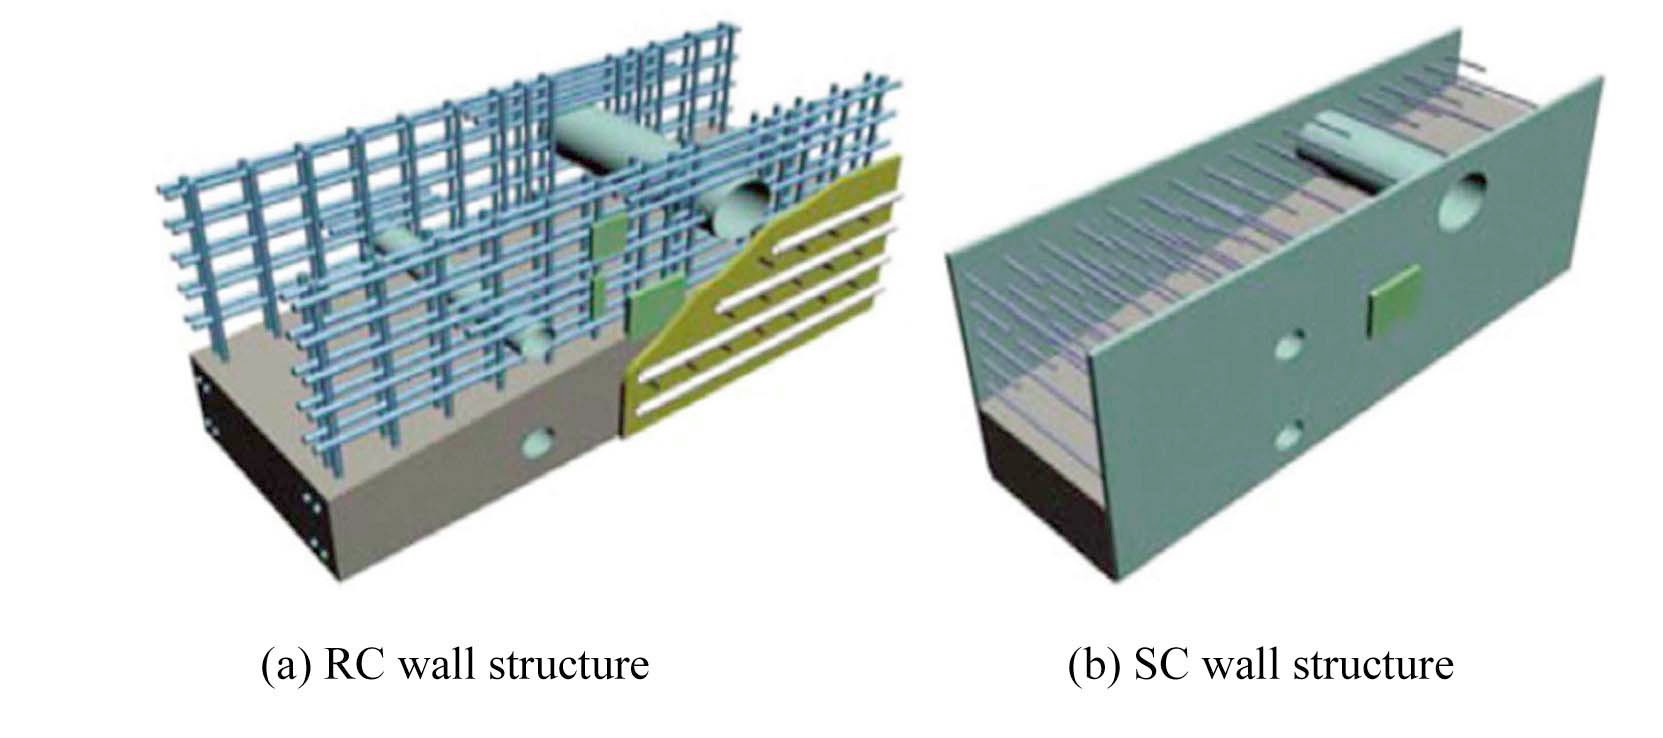 Structural Characteristics of RC wall and SC wall